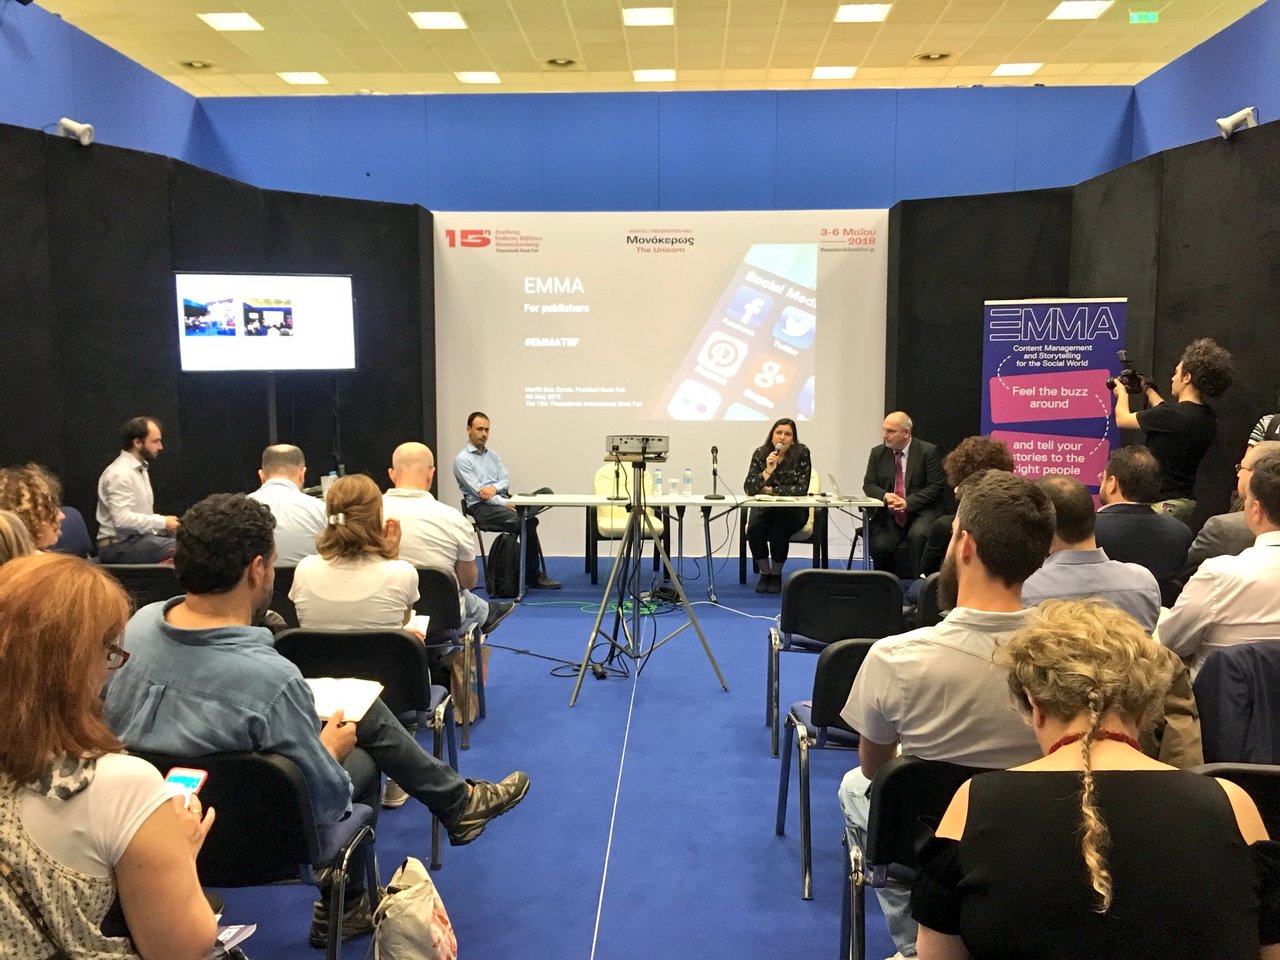 „How to reach your audience?“, Marifé Boix Garcia from #fbm18 about the challenges in #communication in #publishing at the #emmatbf @EMMA_H2020 session at #tbf18 https://t.co/egIQdjCpMK